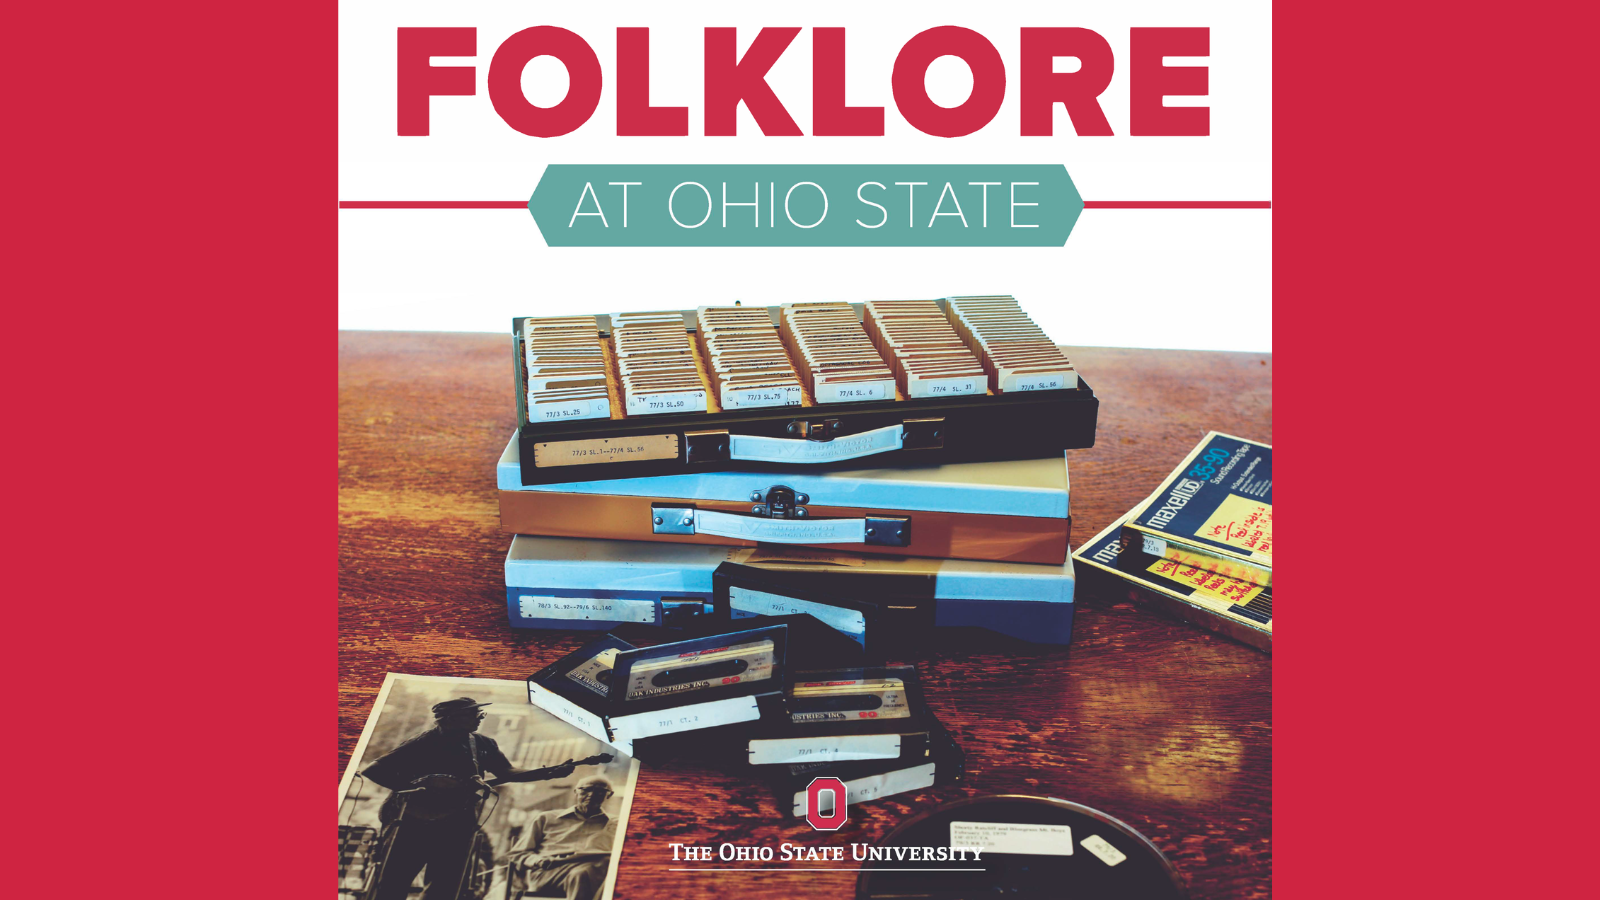 Folklore at Ohio State